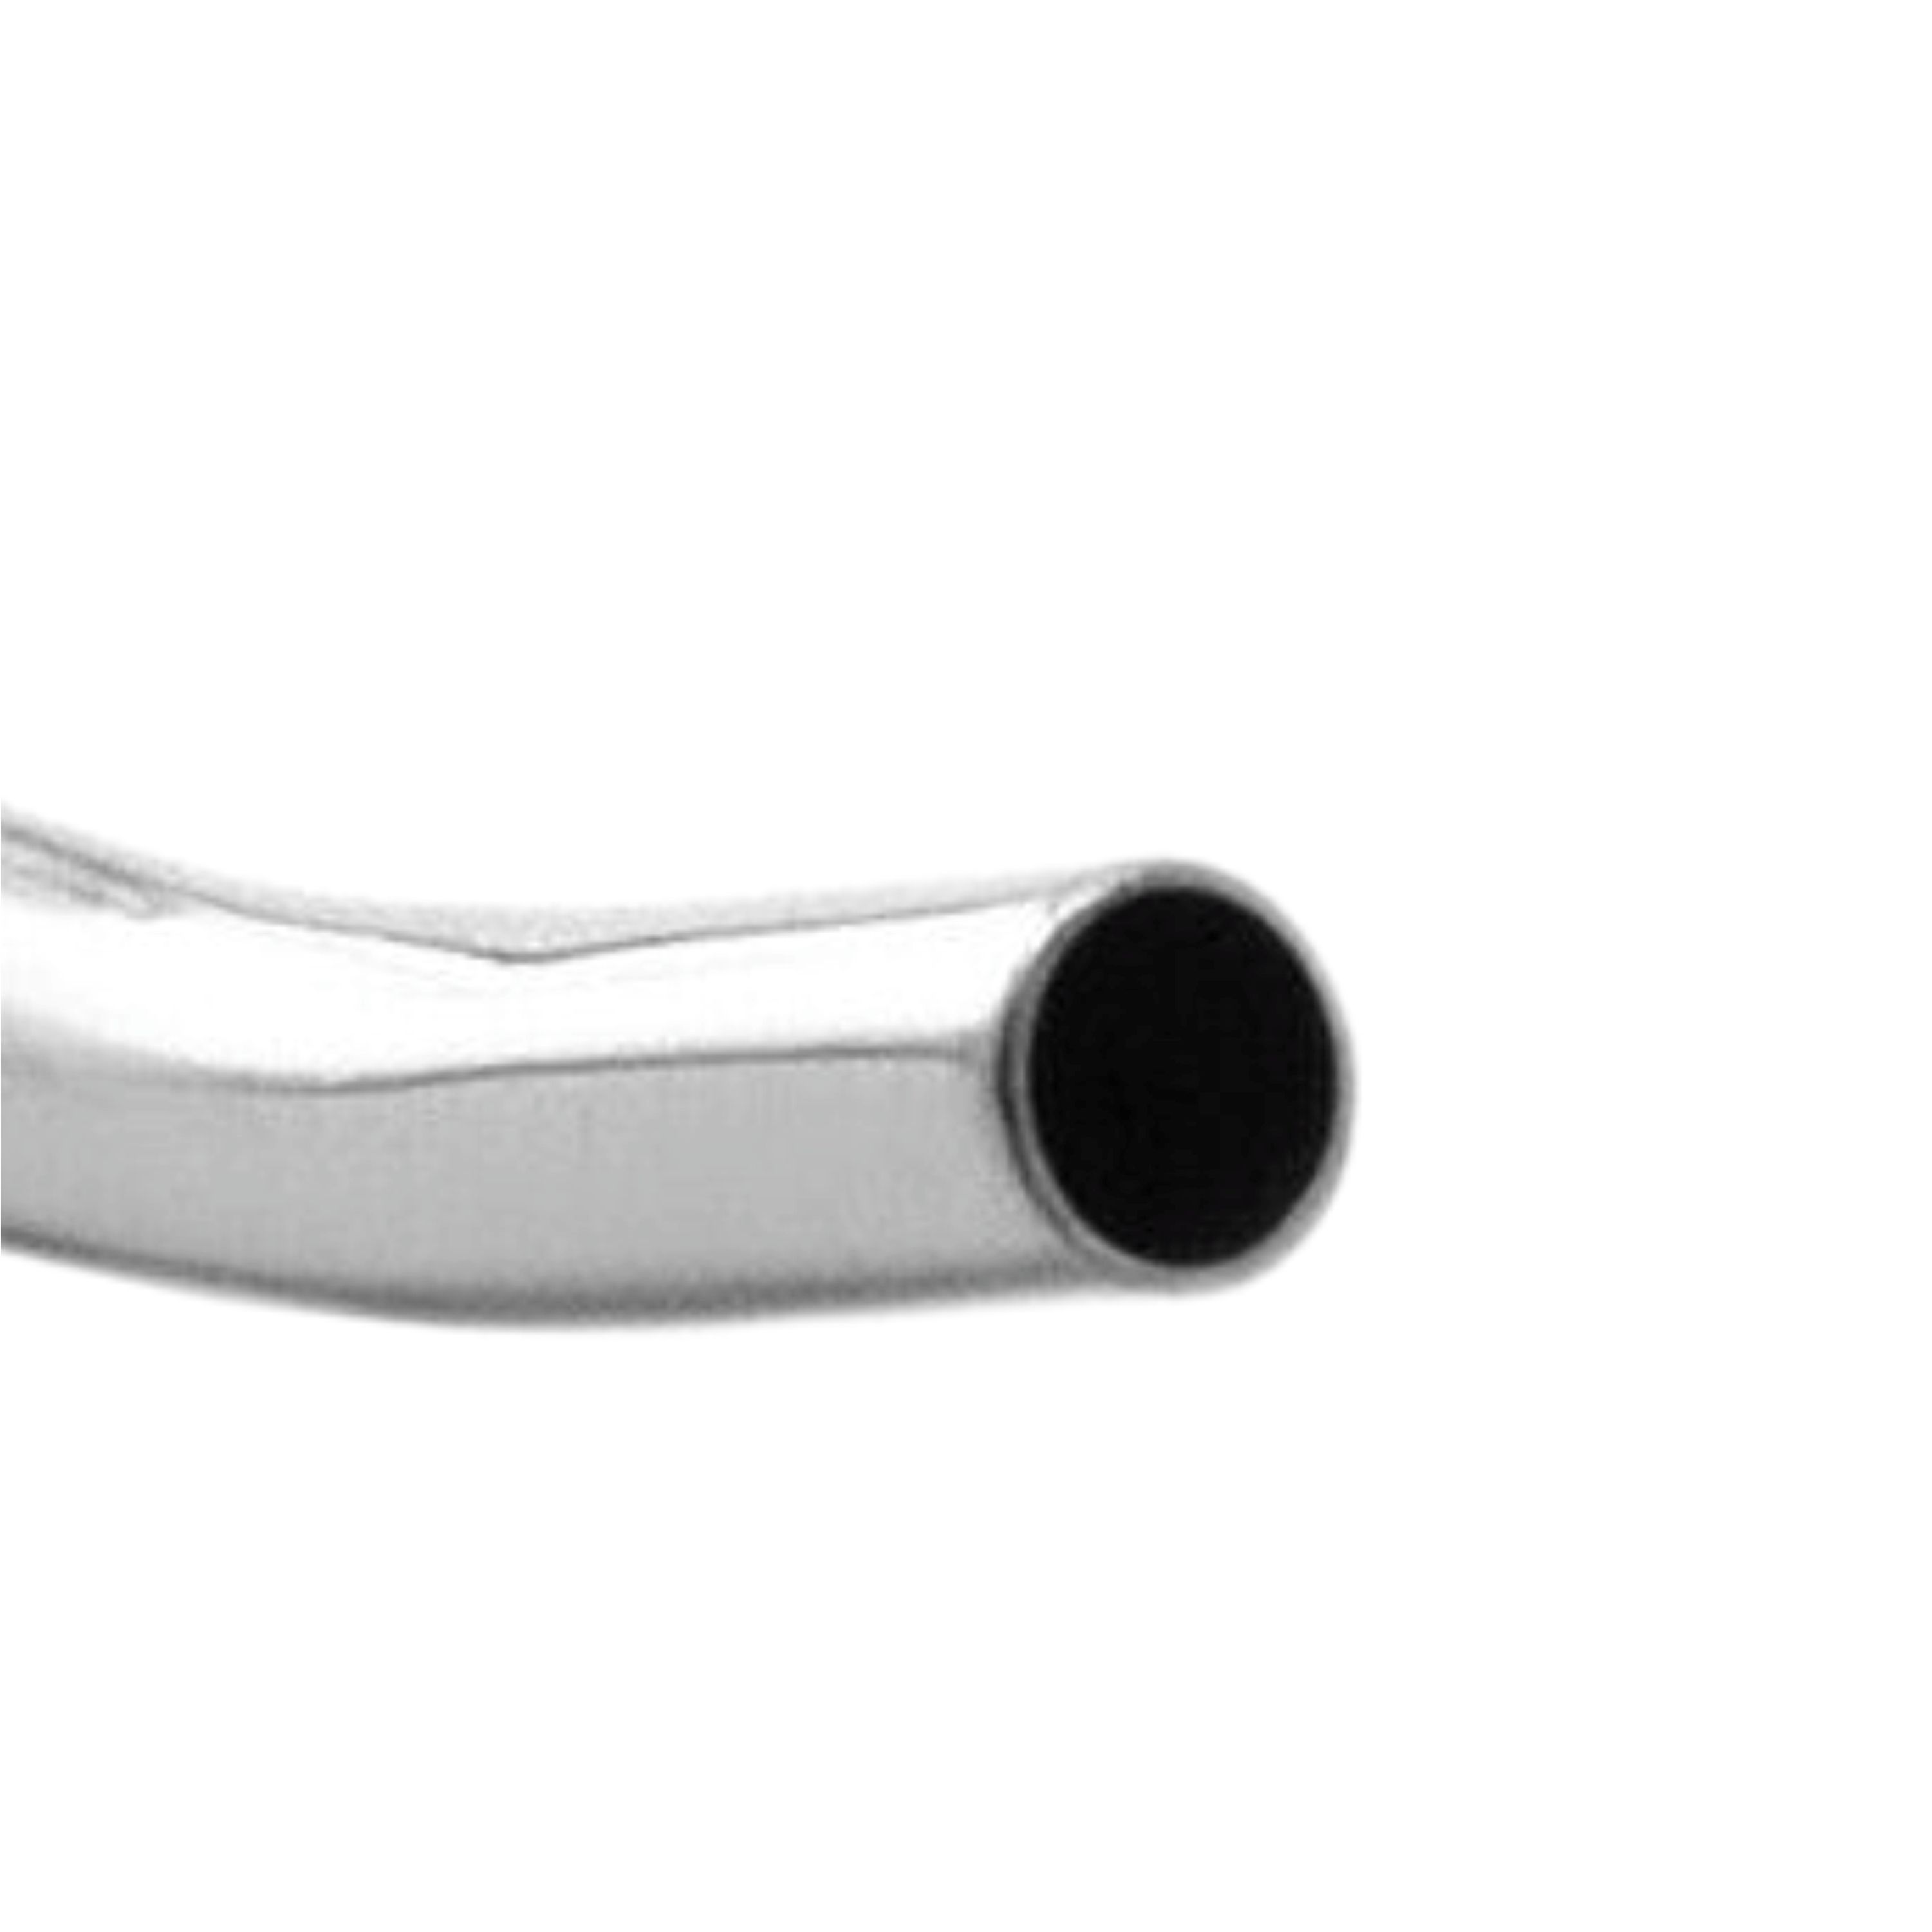 Trust & Care Bone Injector & Collector 3.5Mm Curved